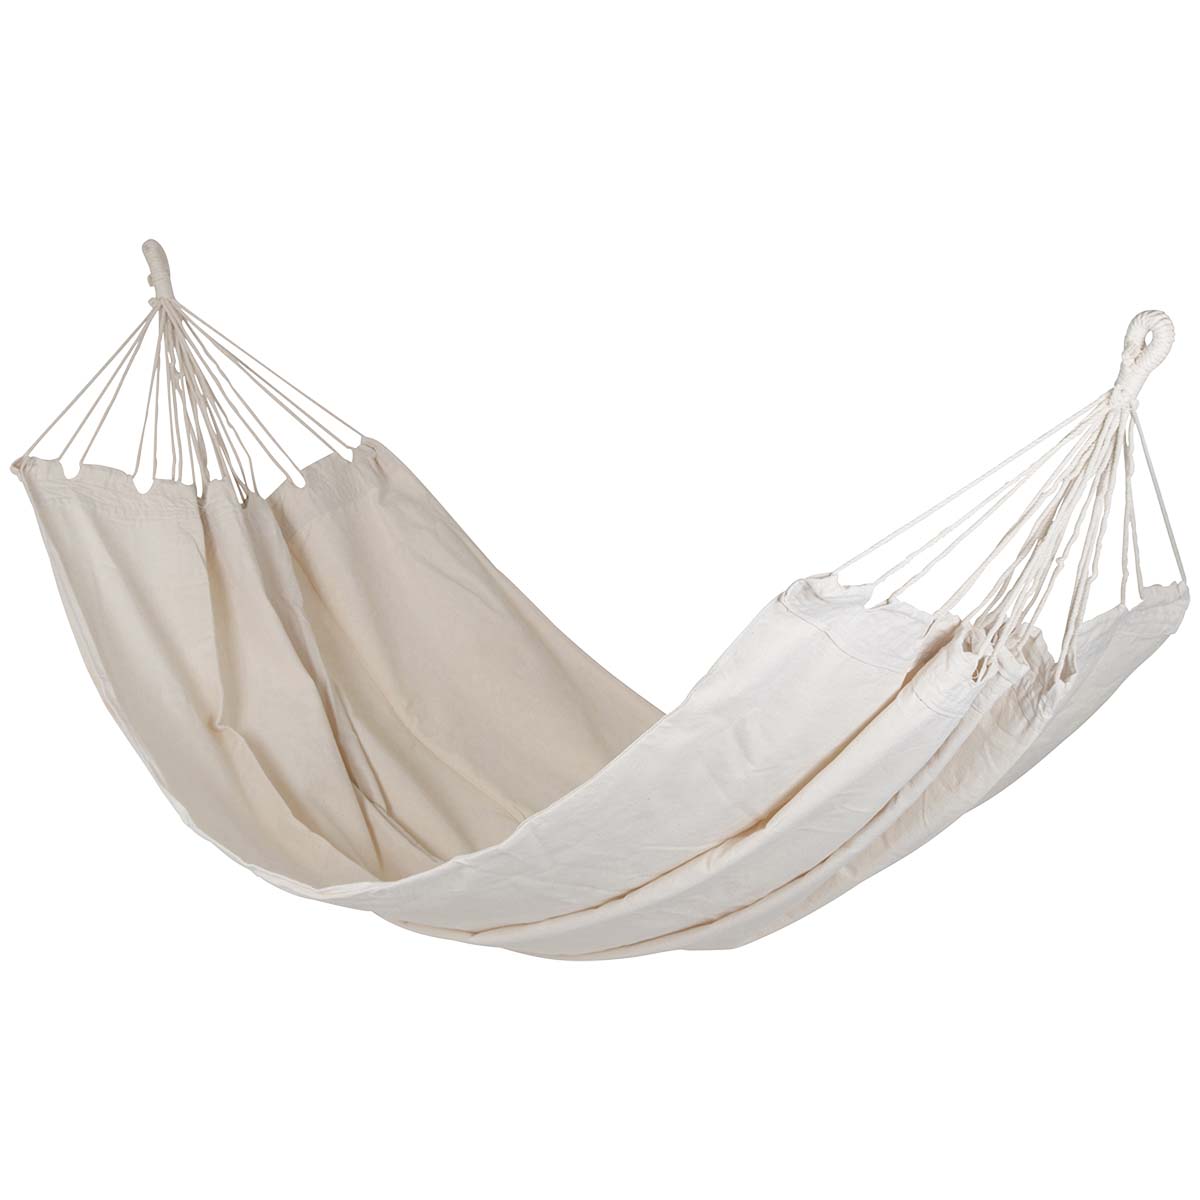 7100223 A stylish and sturdy hammock. To enjoy your holiday to the fullest! Made of sturdy 320gr/m² cotton/polyester. The hammock has no spreading stick, allowing it to adjust to the shape of your body with reduced risk of tilting - for maximum comfort. Maximum load-bearing capacity: 150 kilograms.